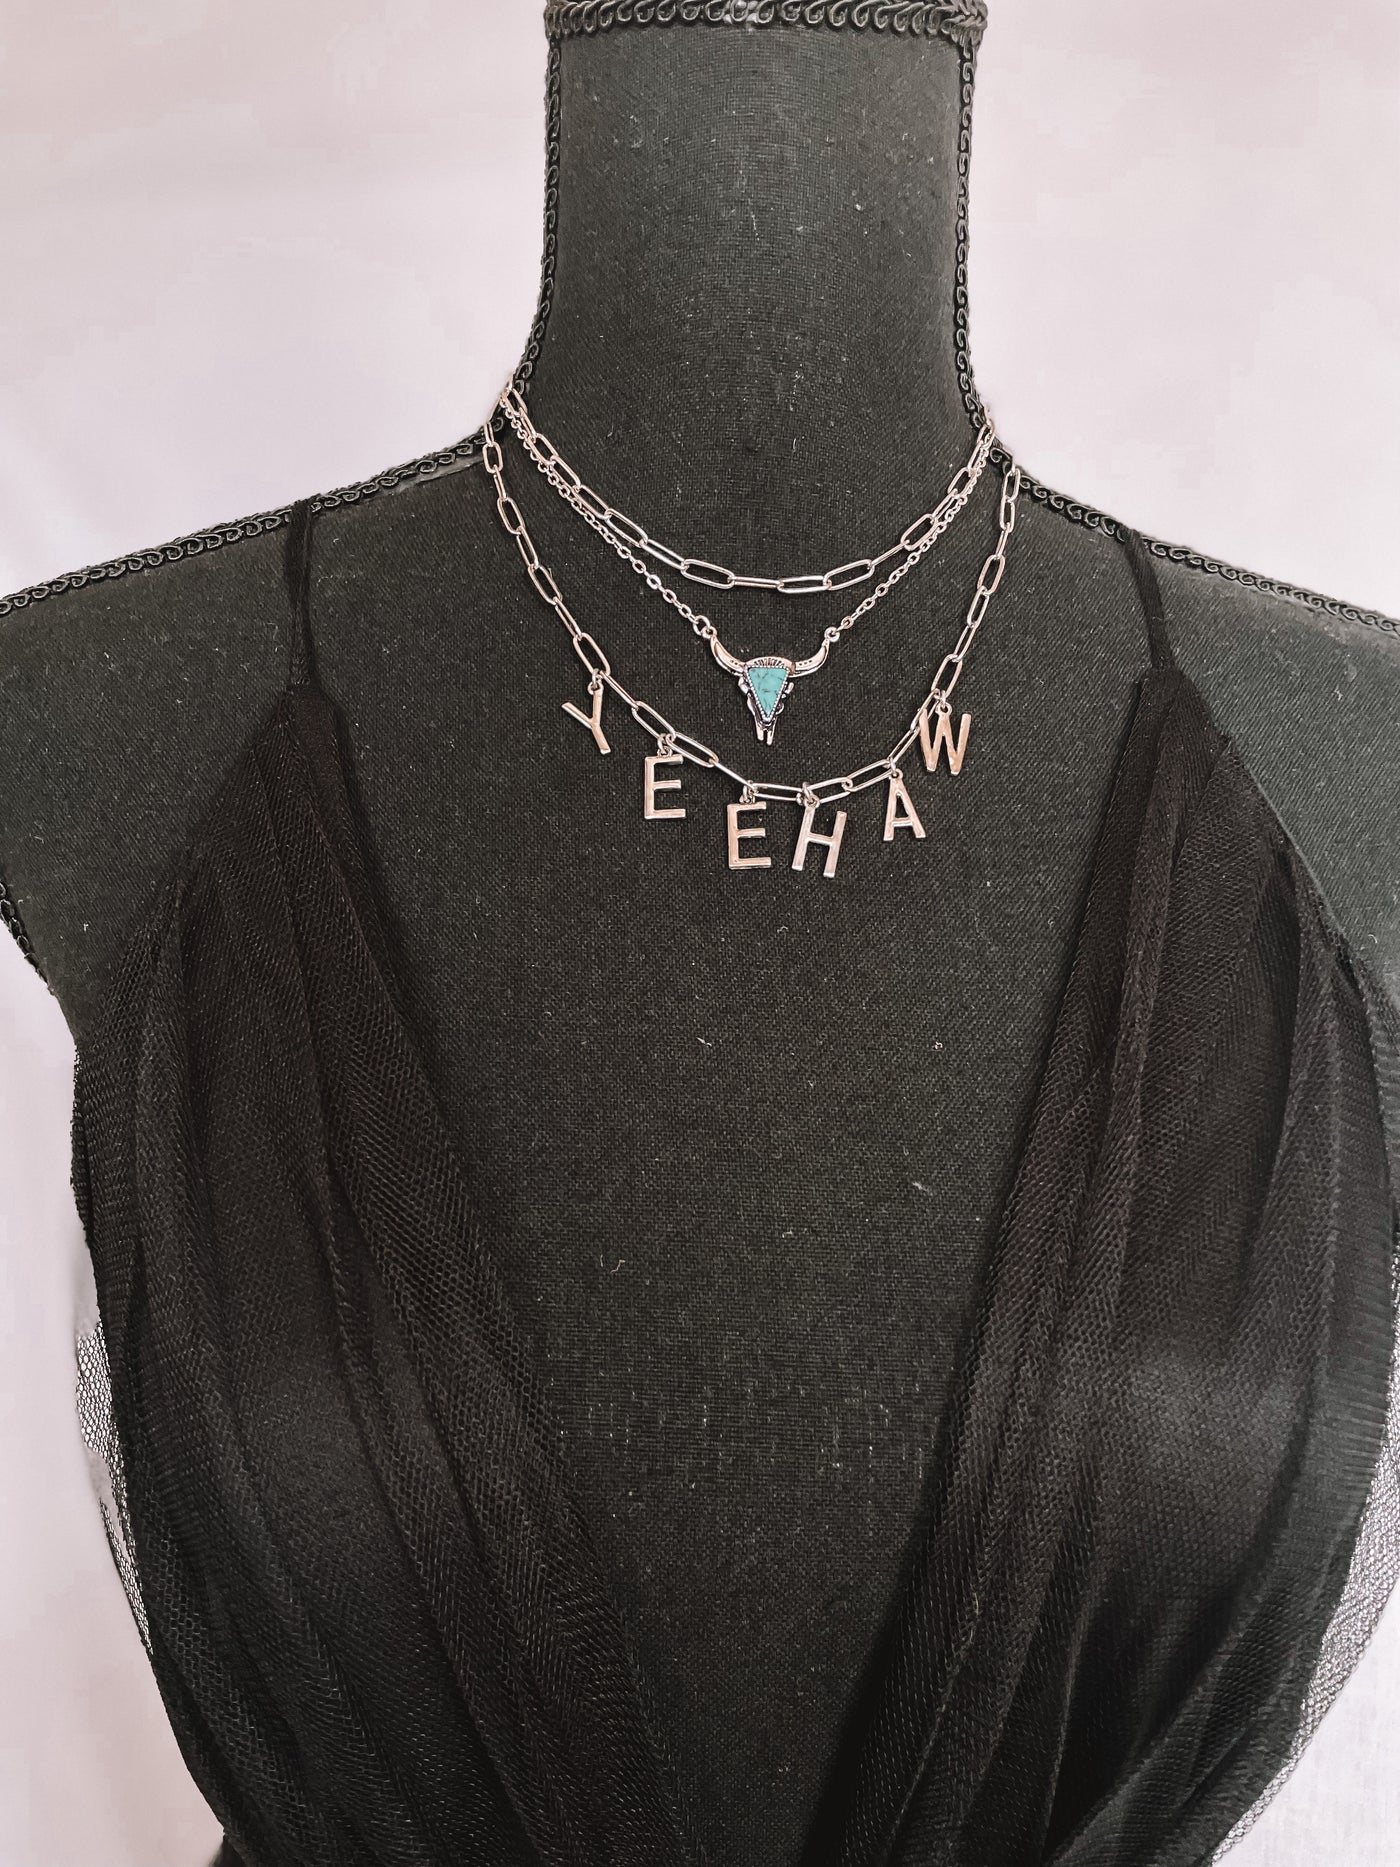 YEEHAW Chain Necklace